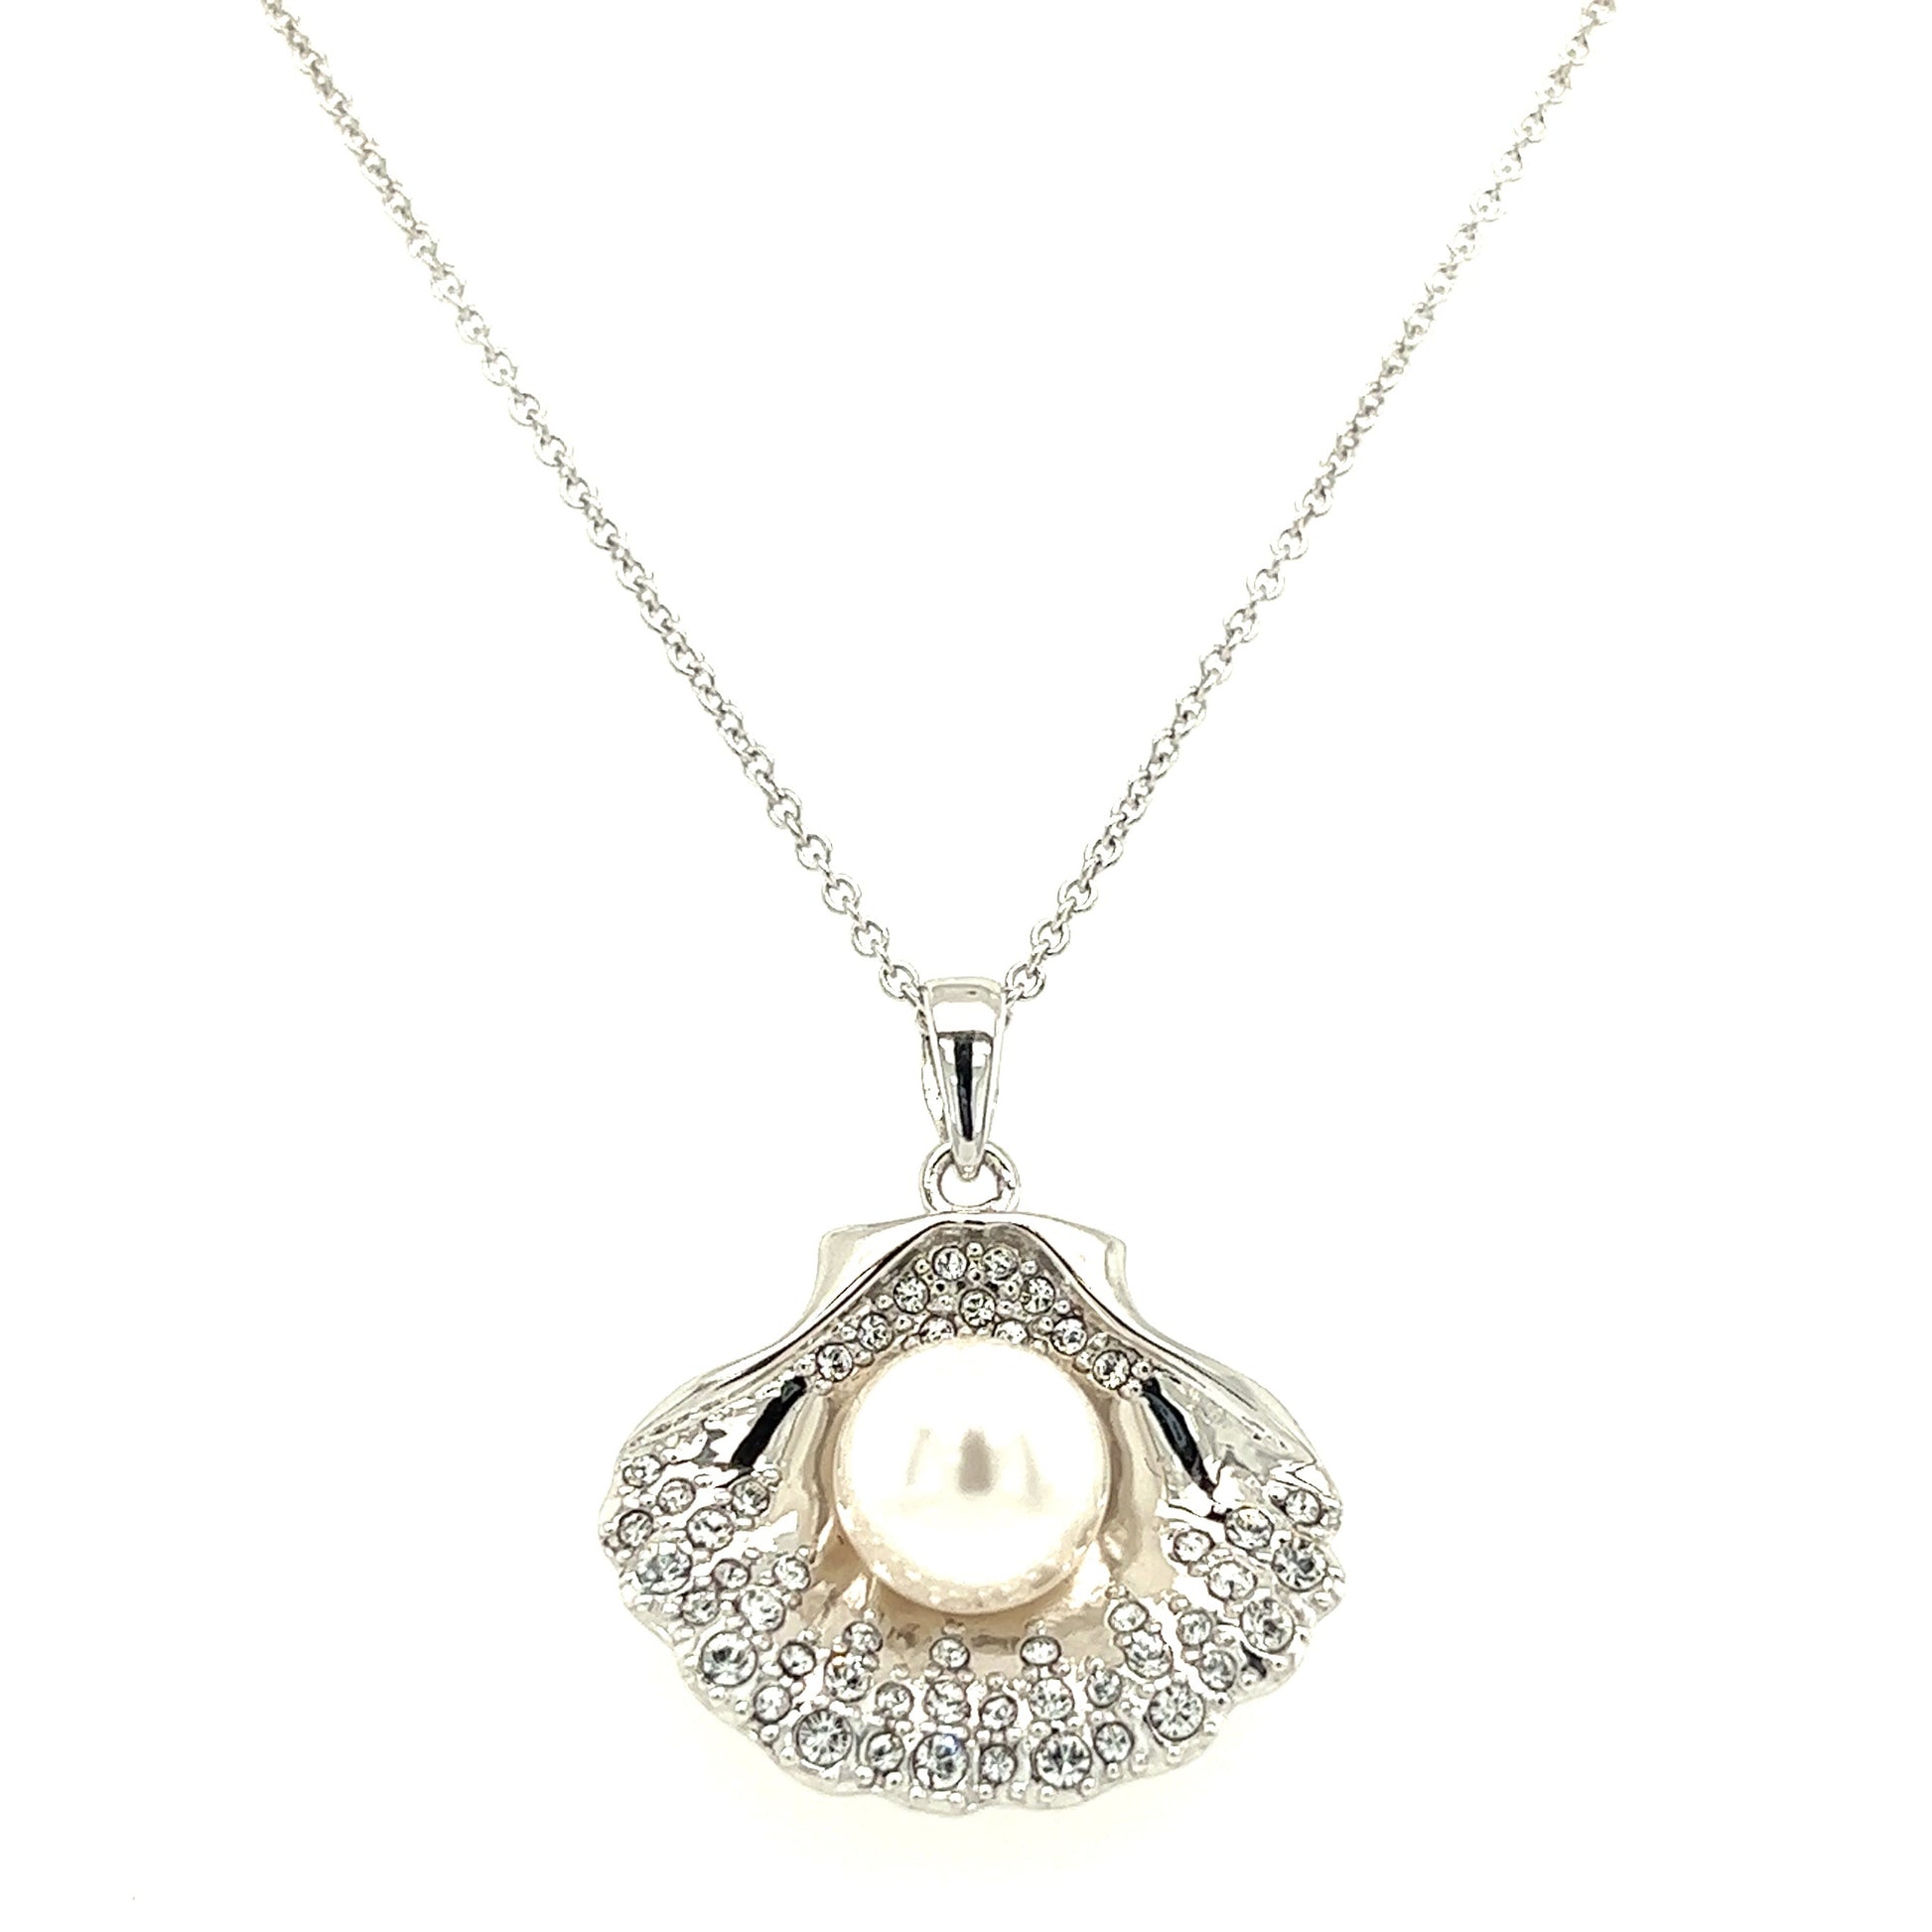 Scallop Shell Necklace with White Pearl and White Crystals in Sterling Silver Front View